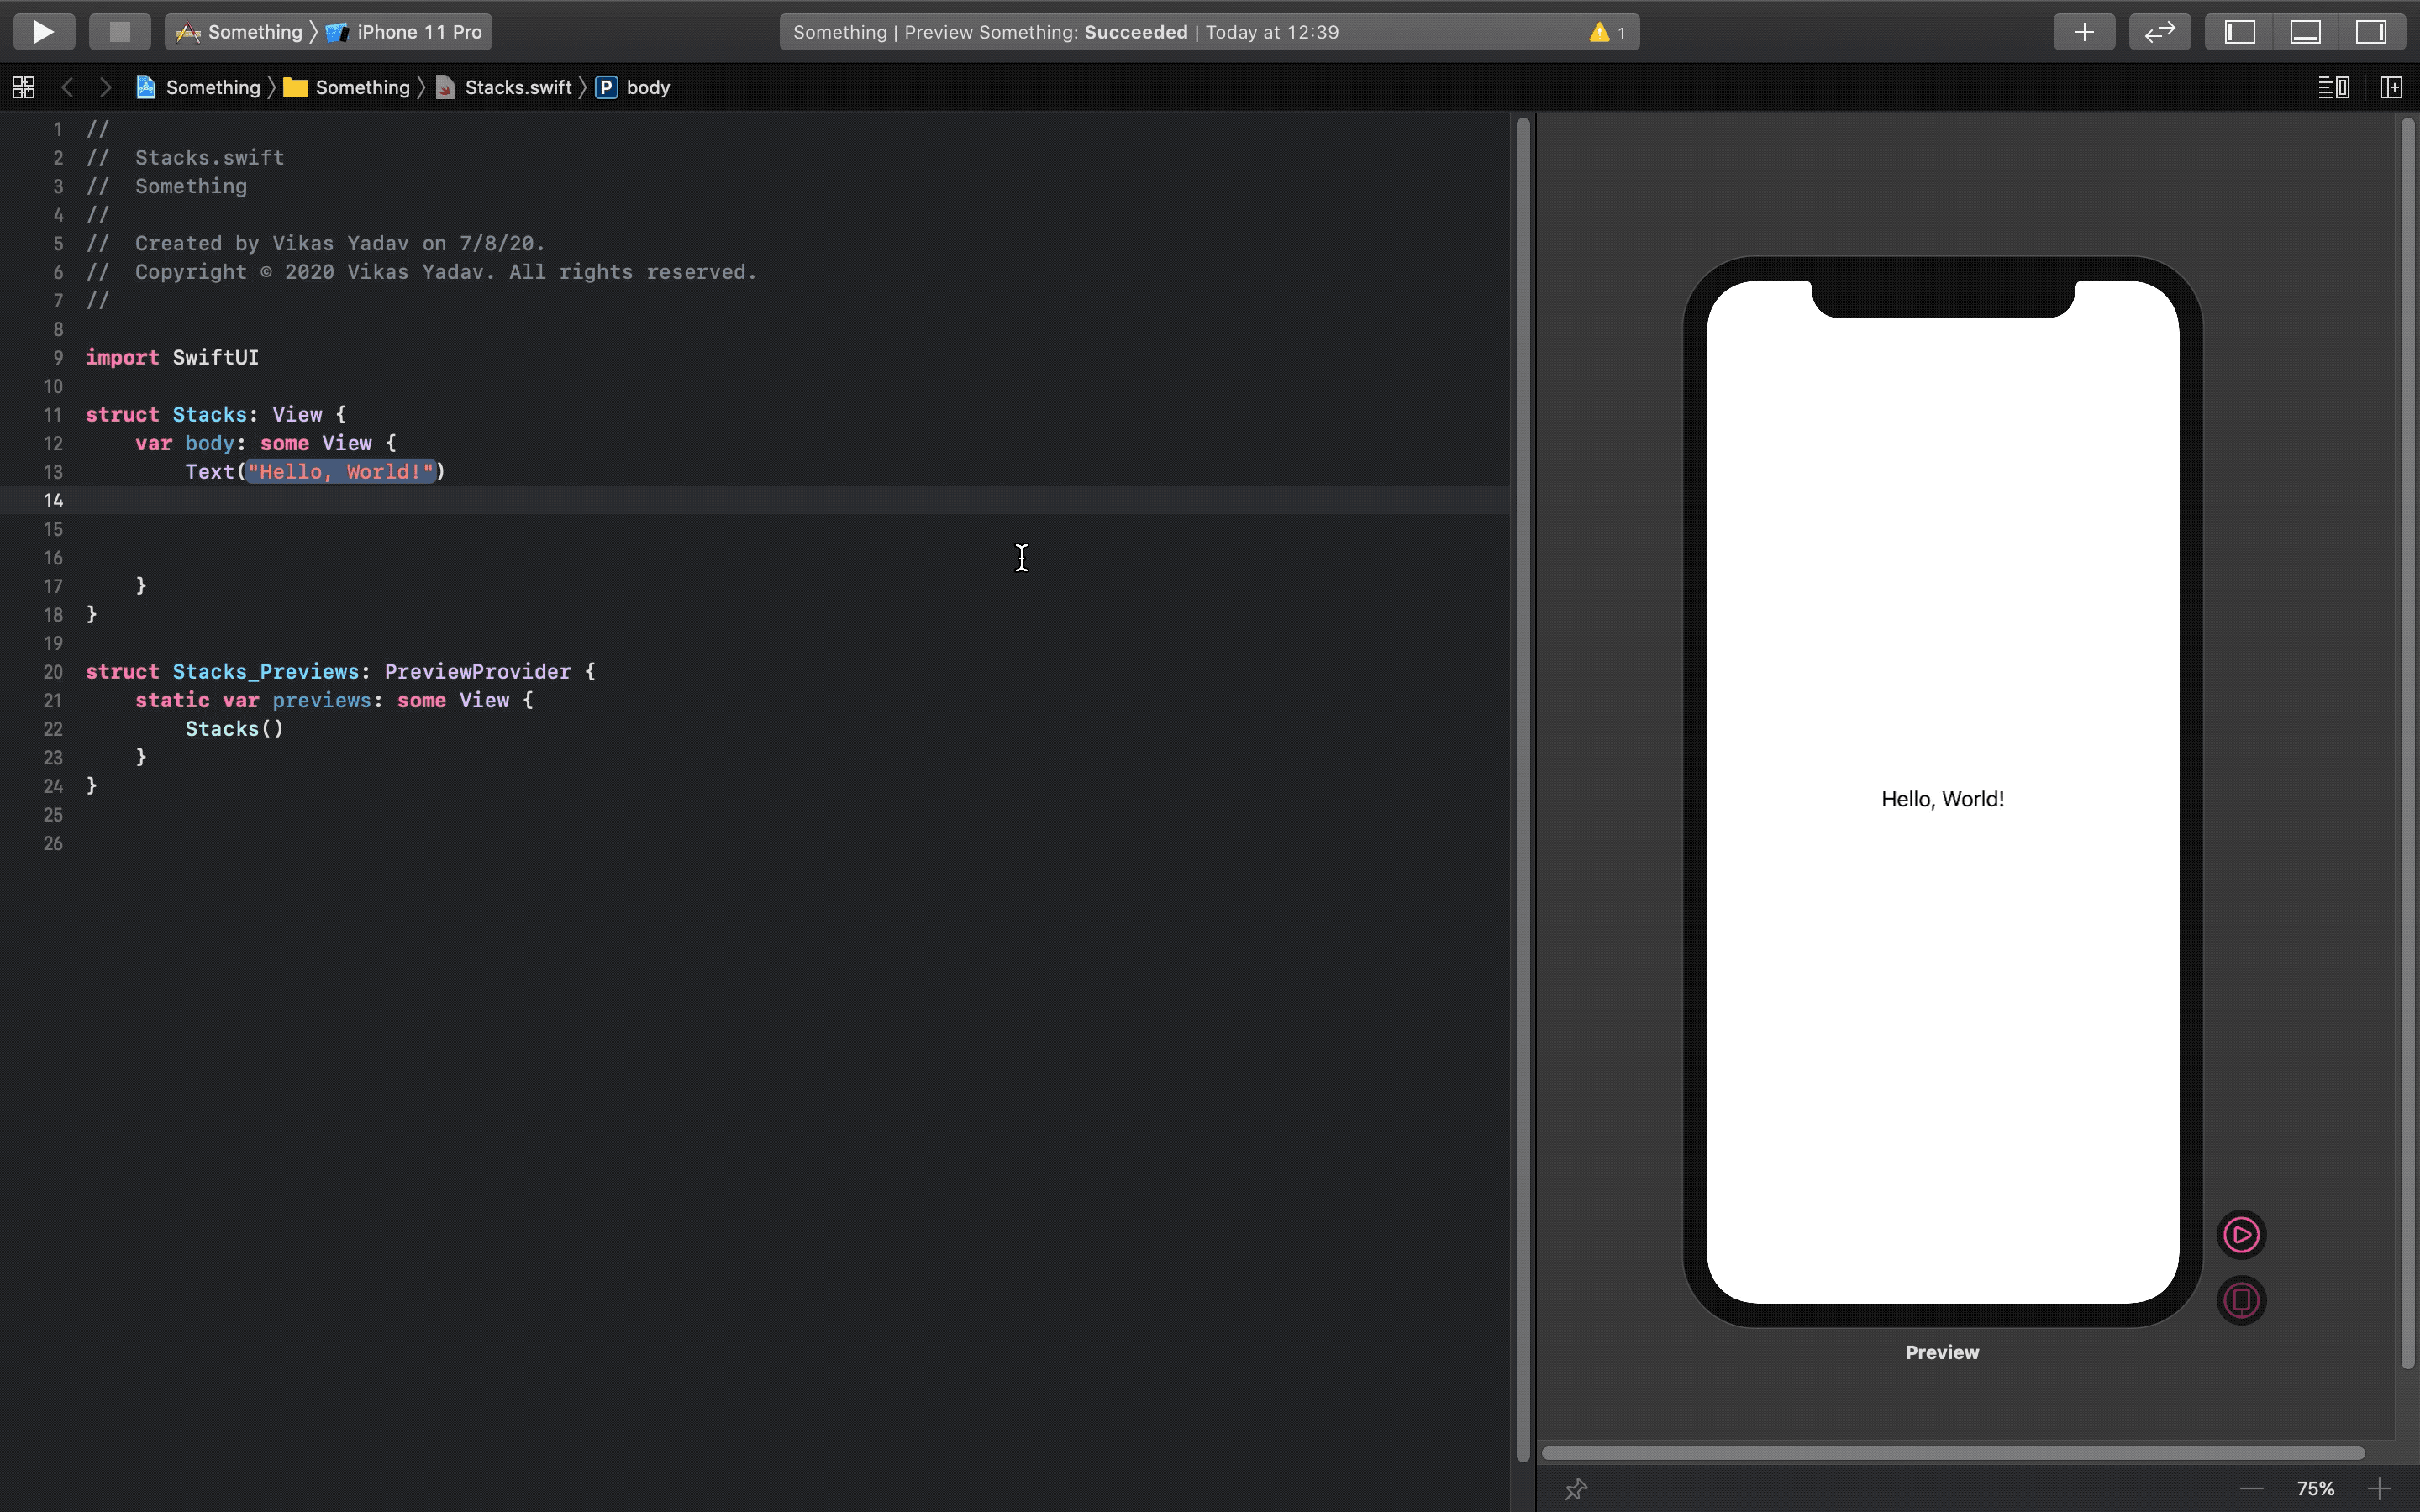 Here I am trying to add another text element and an image but Xcode is not able to generate a preview